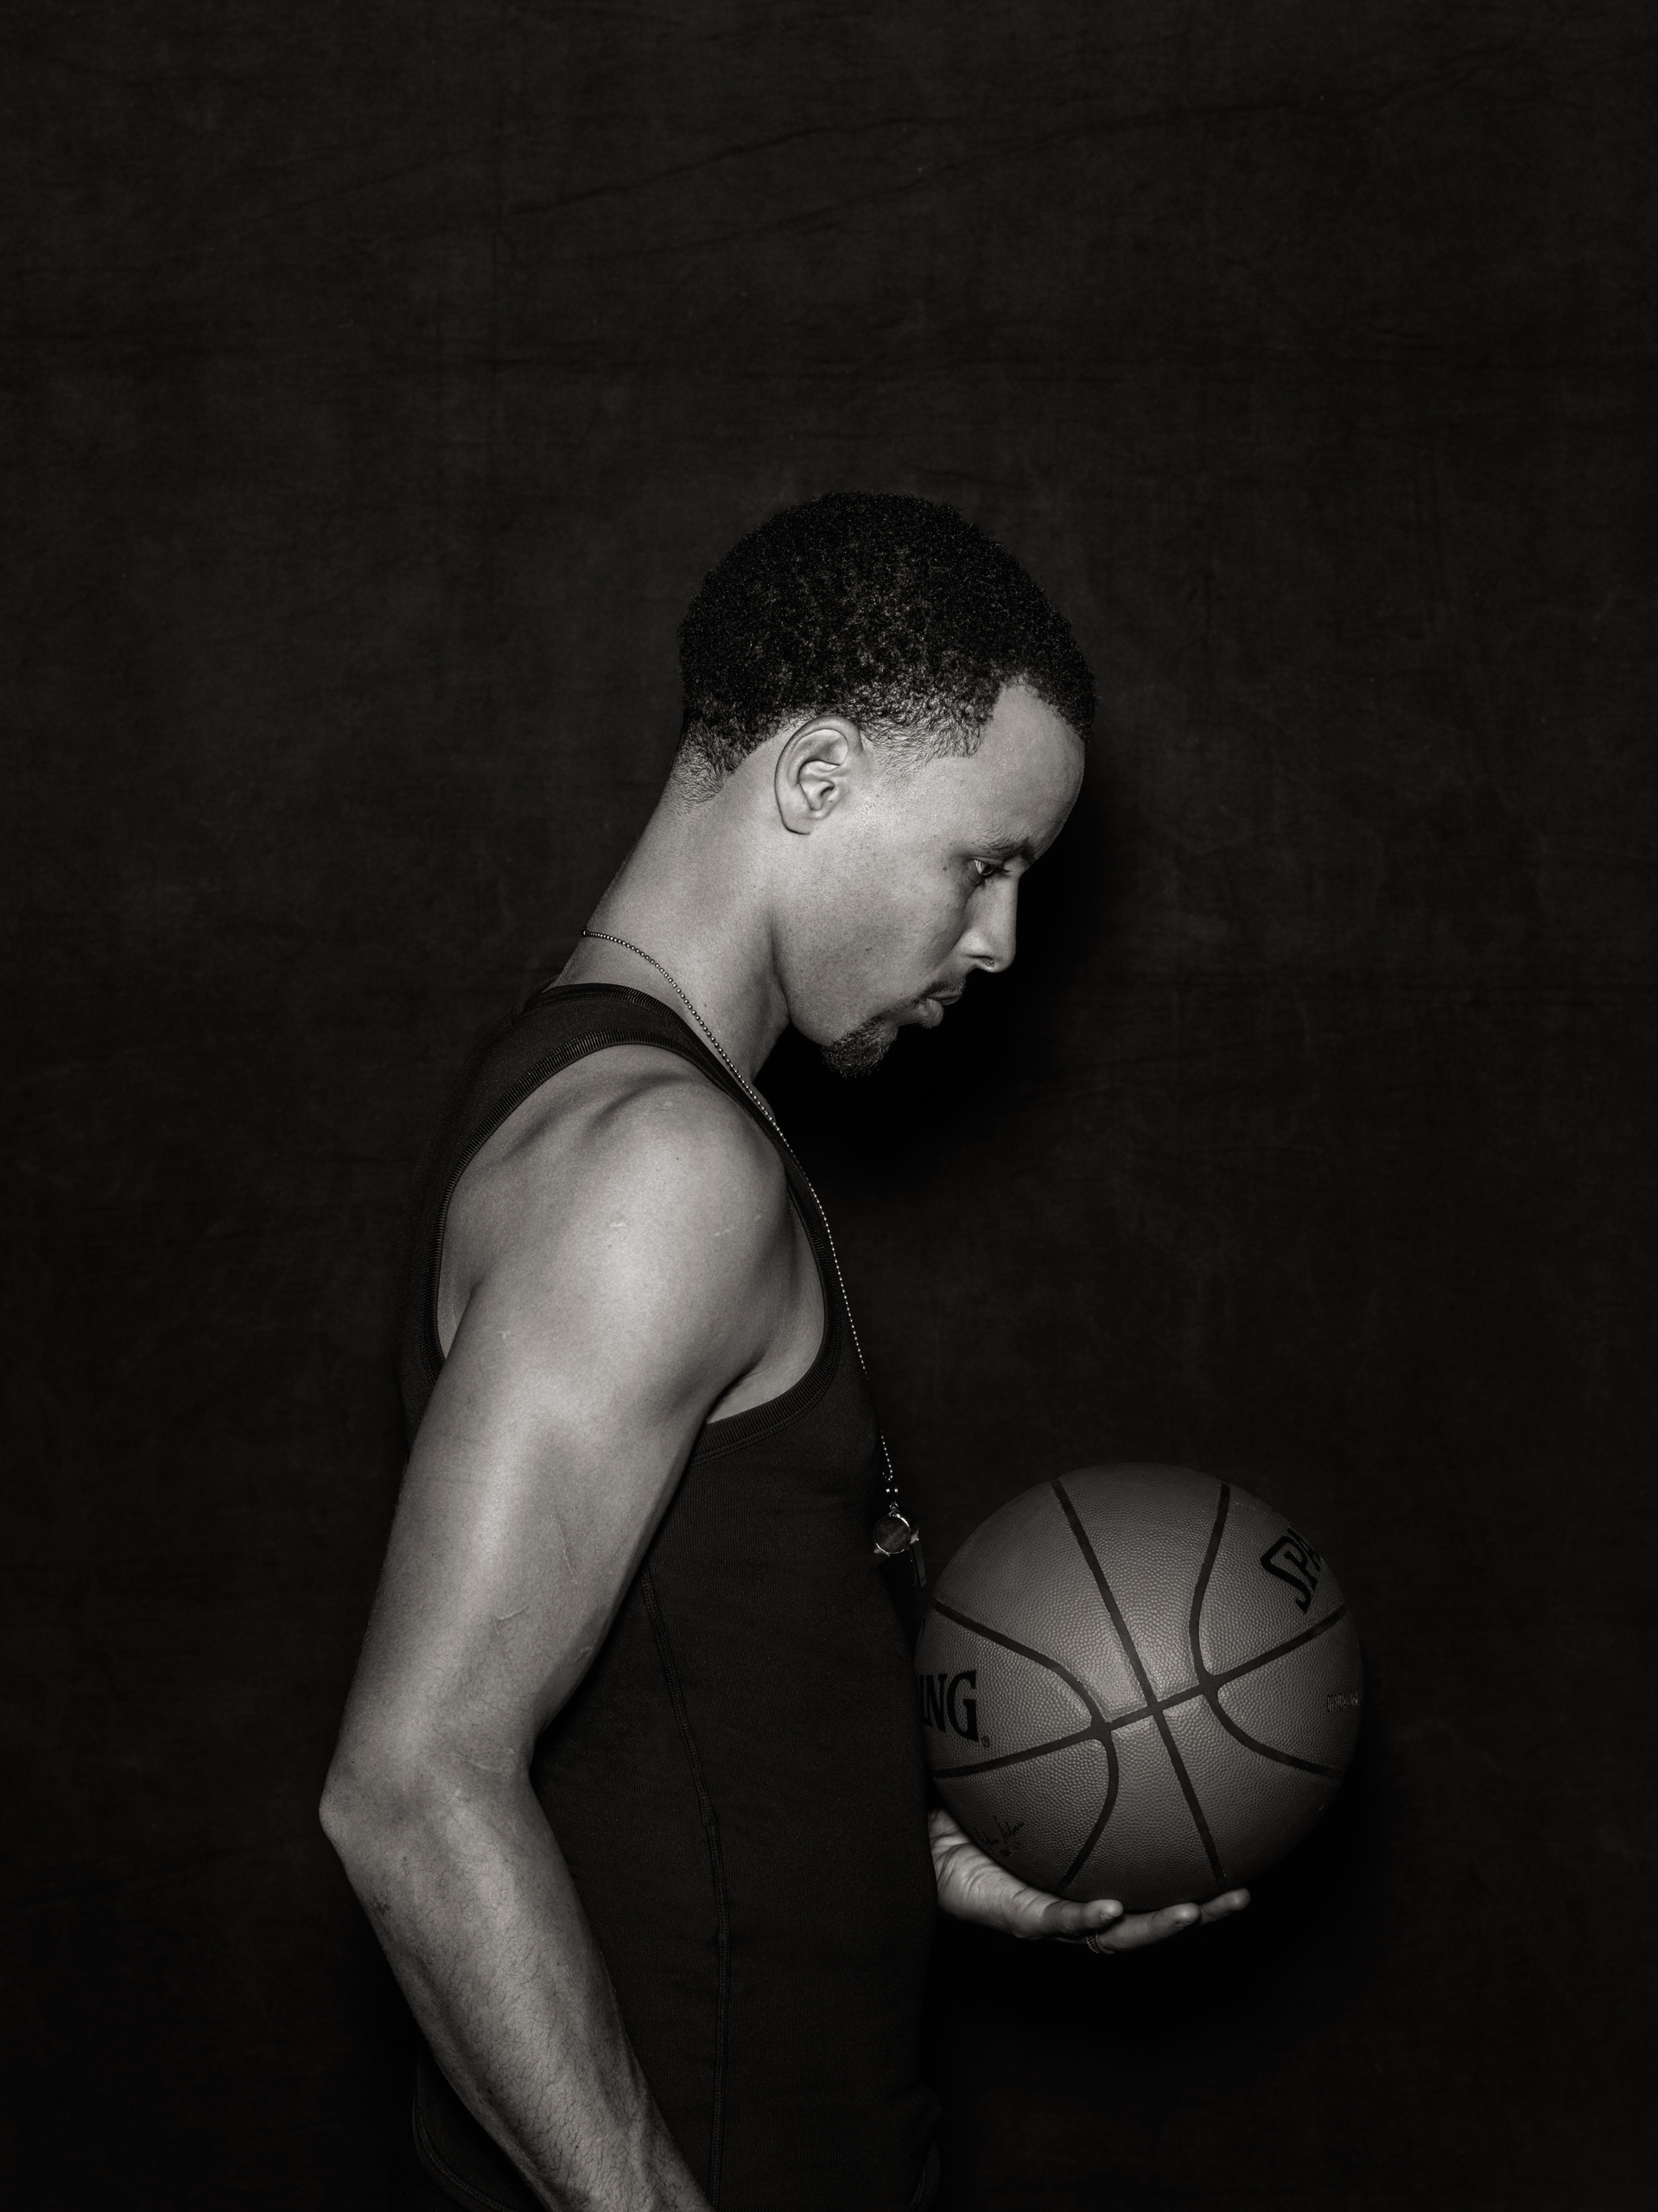 Inside Stephen Curry's magic show (Dylan Coulter)